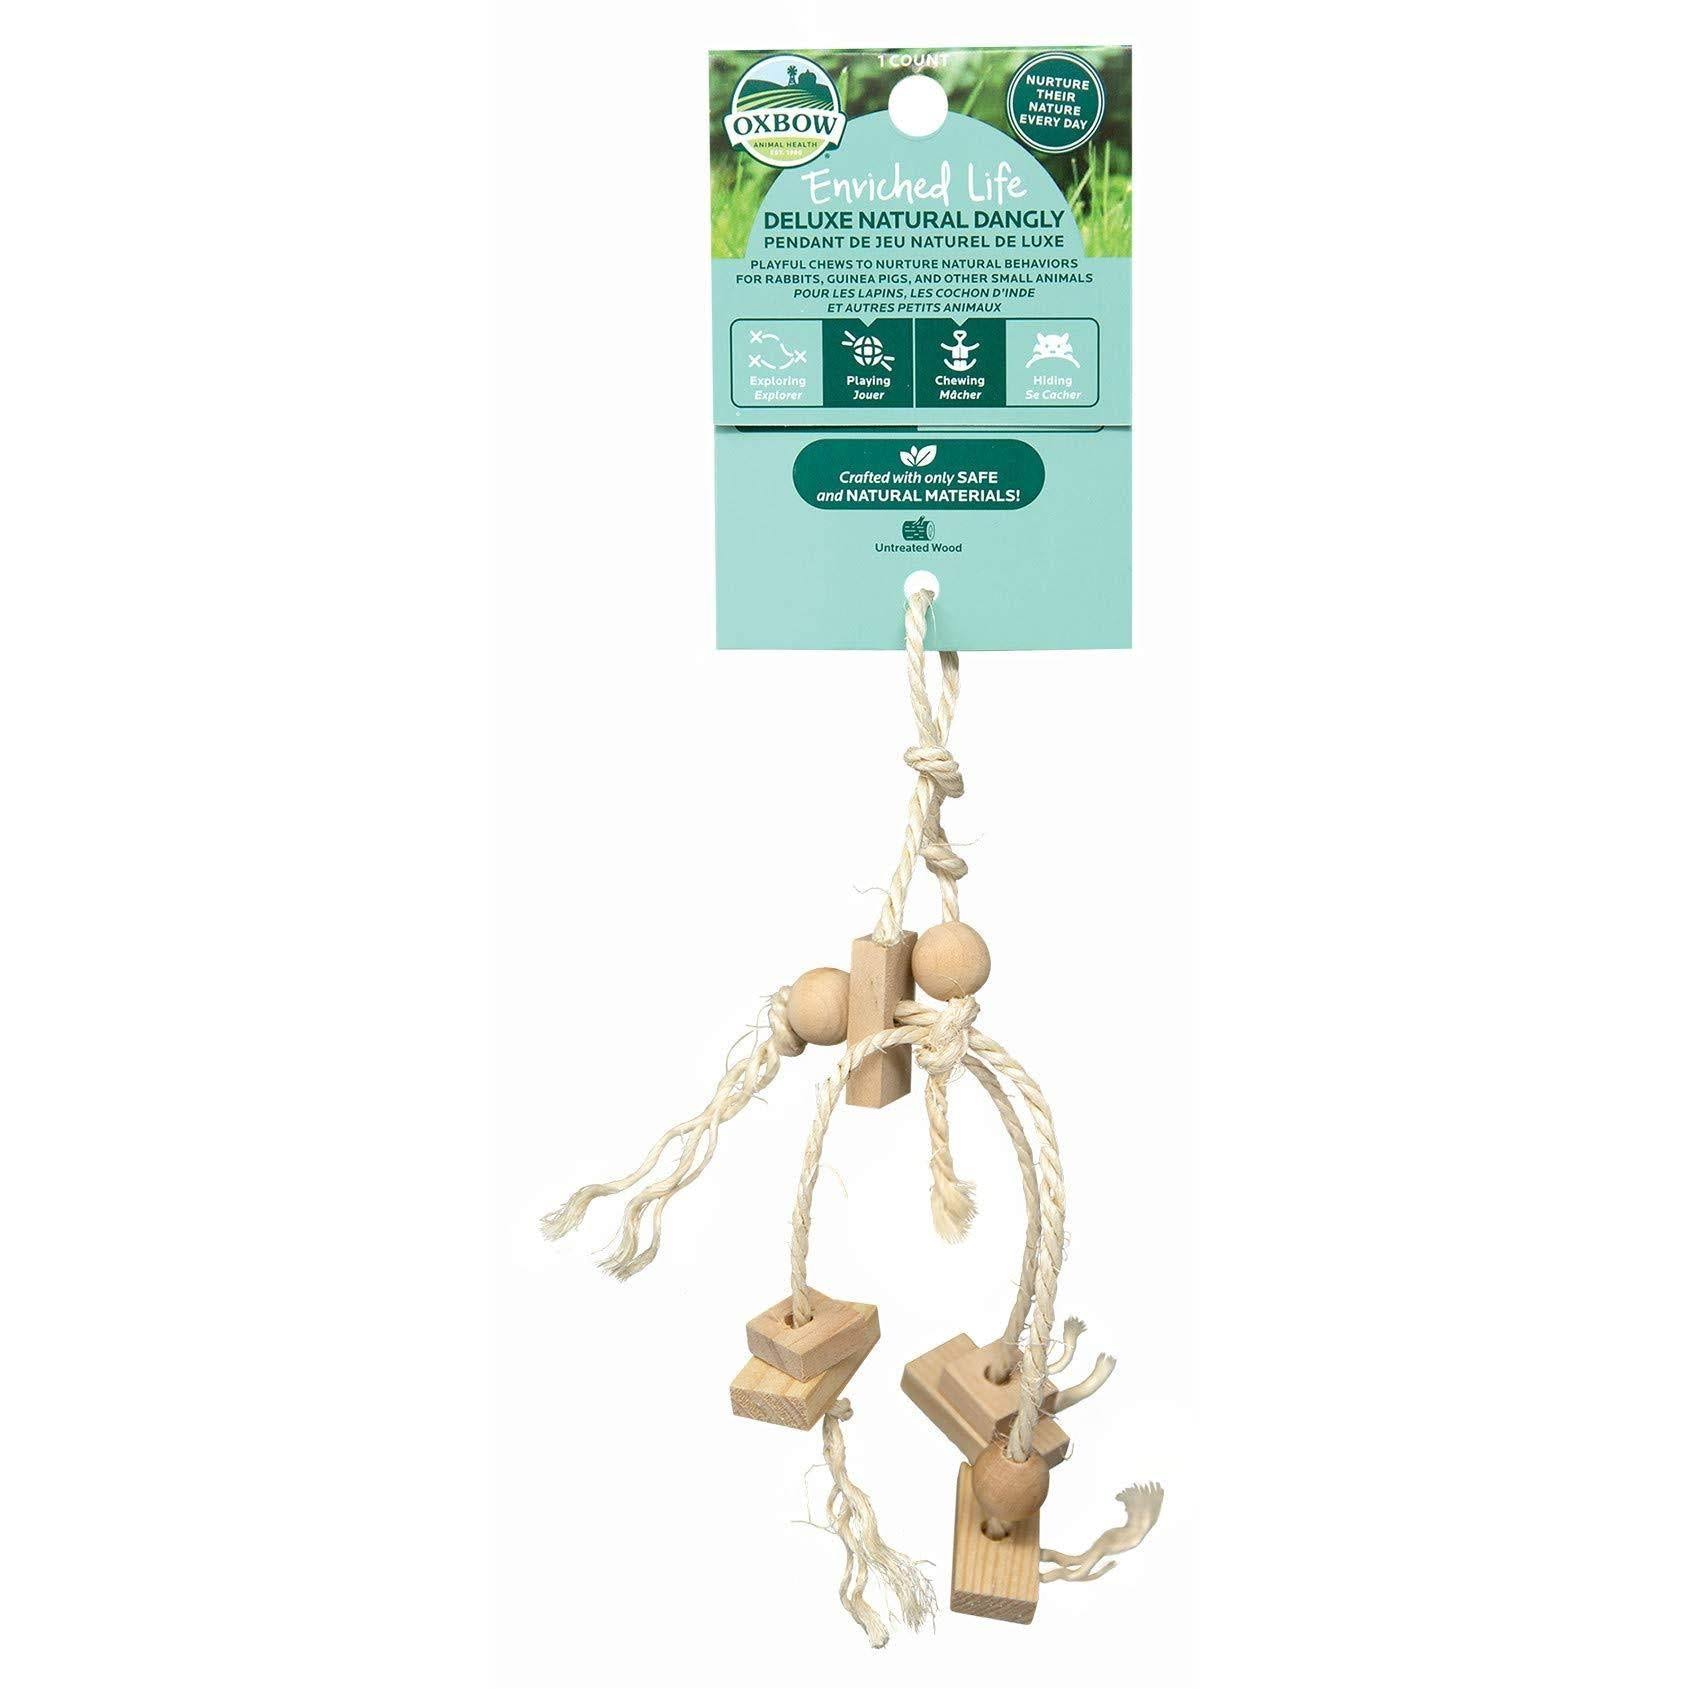 Oxbow Enriched Life Deluxe Natural Dangly for Small Animals